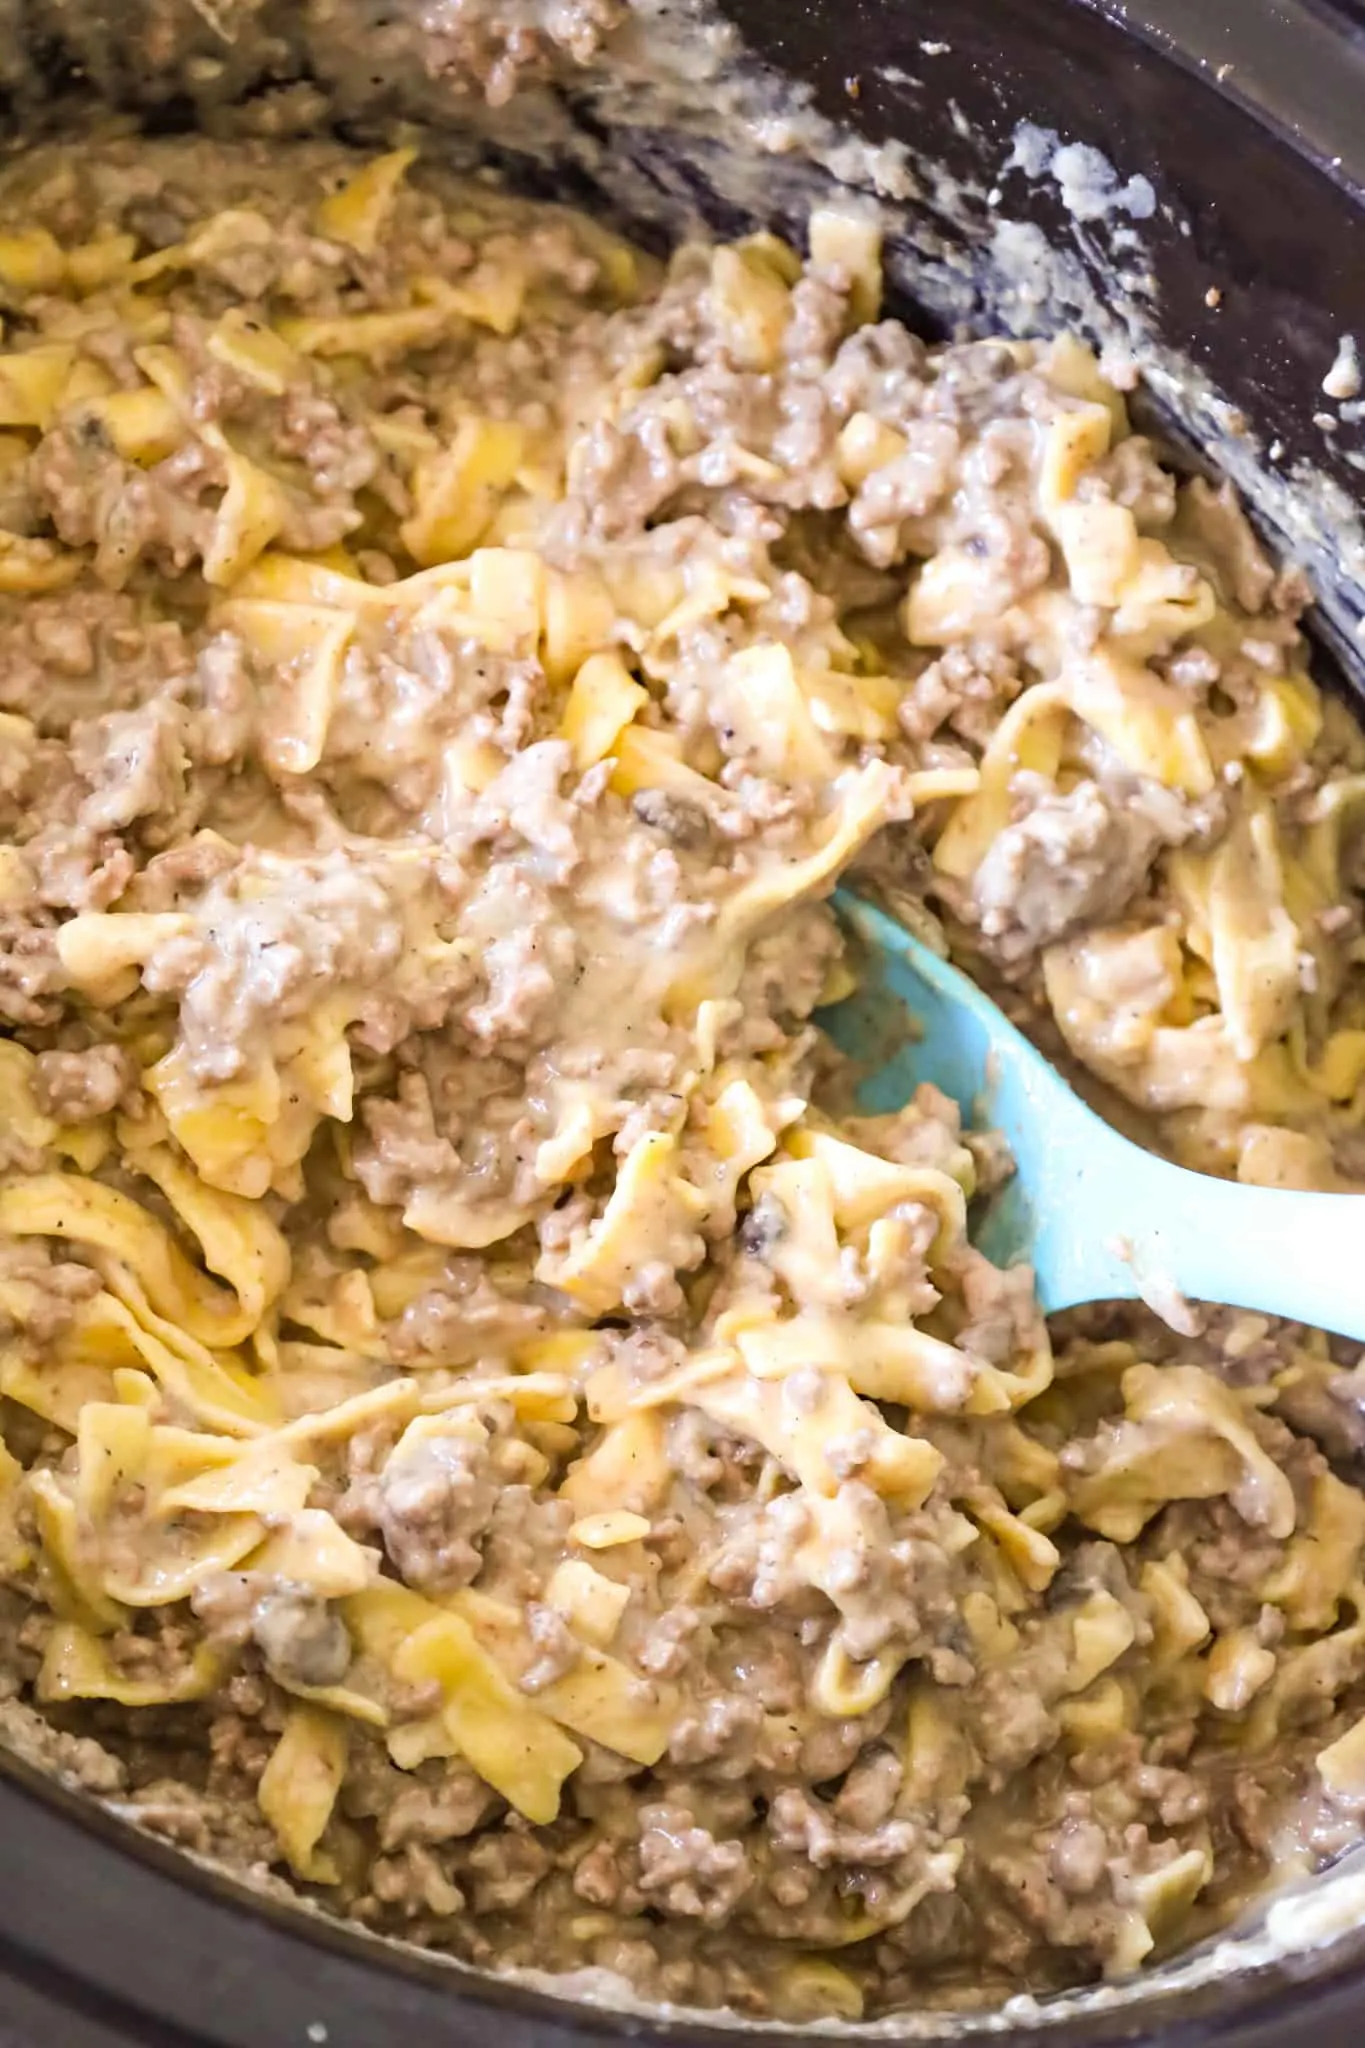 Crock Pot Beef and Noodles is an easy slow cooker dinner recipe loaded with ground beef and egg noodles cooked in a sauce made from beef broth and cream of mushroom soup.